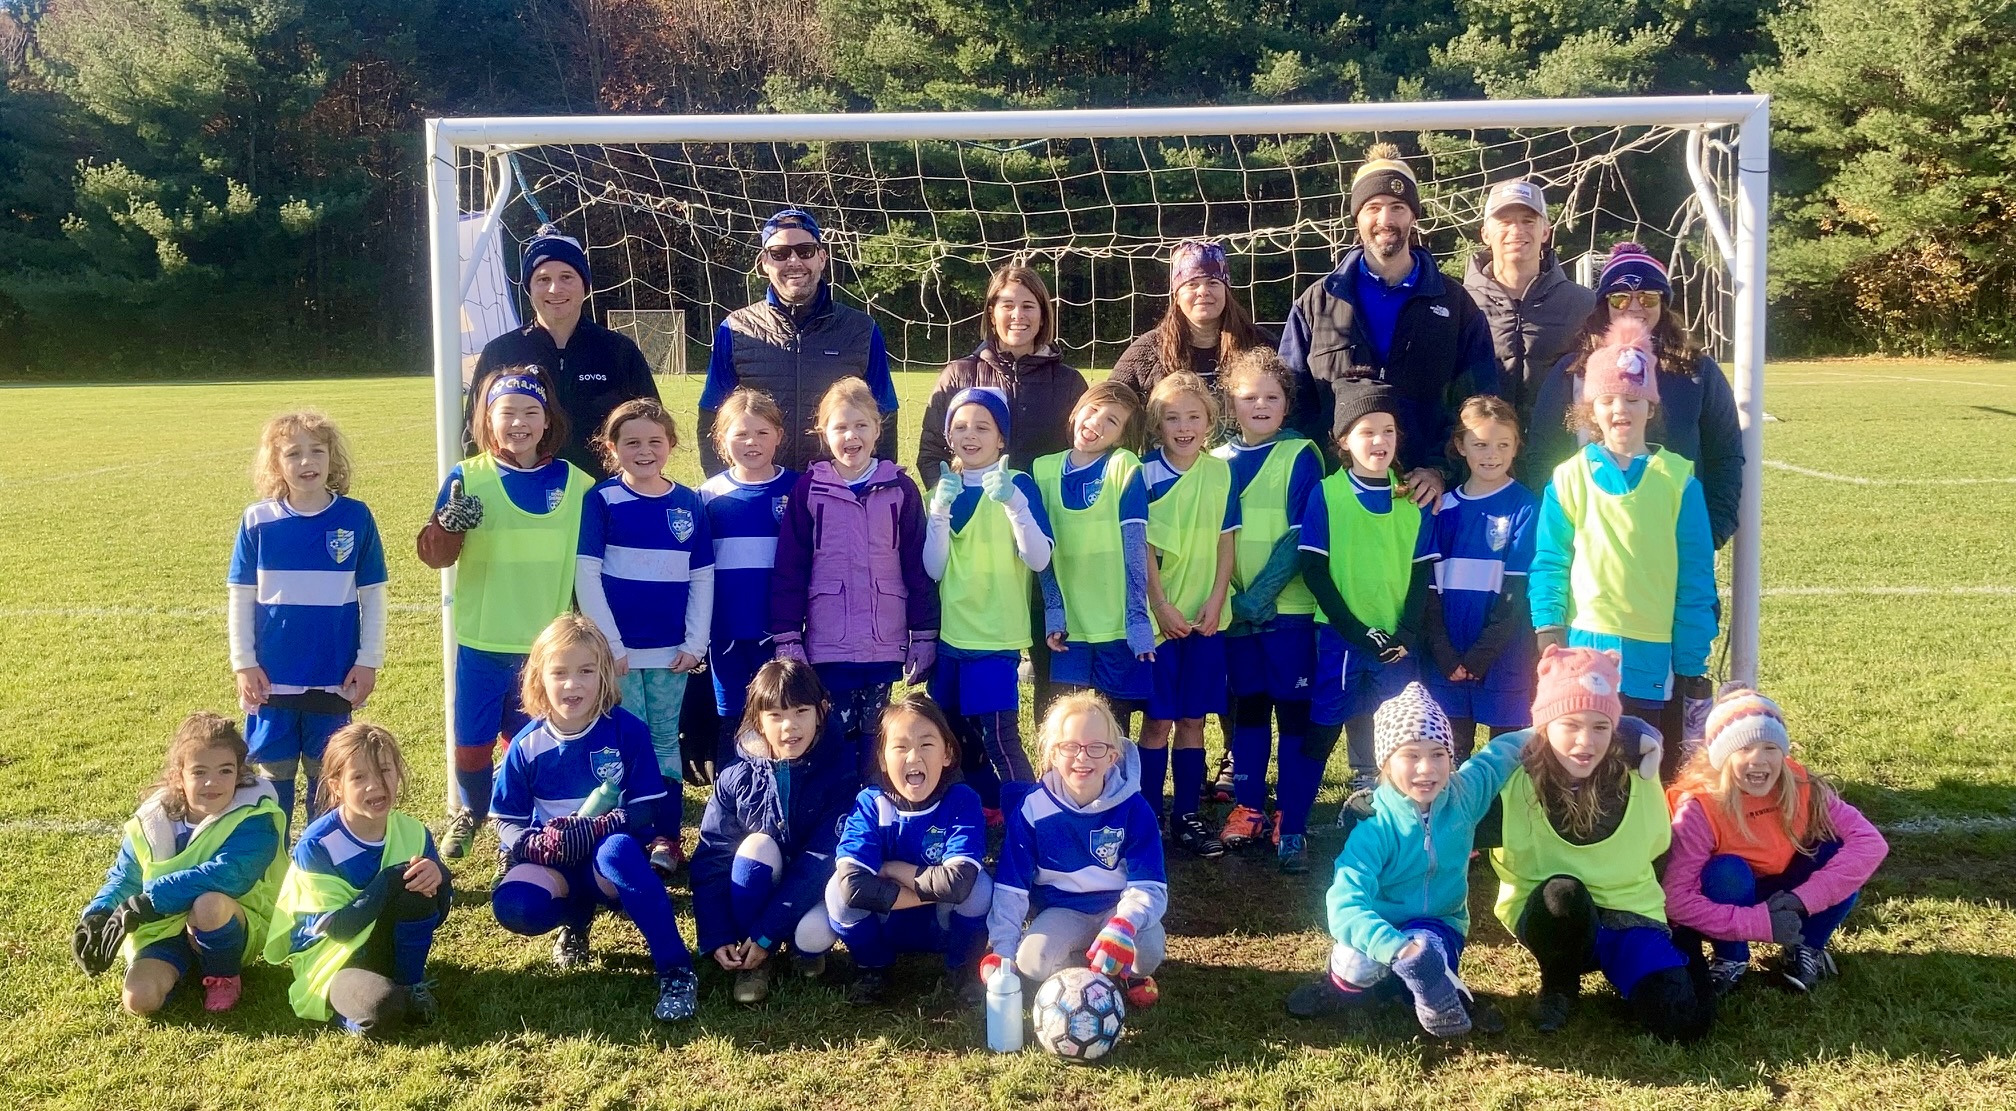 2nd grade girls is where friendships mean more than goals and the love of soccer is palpable.